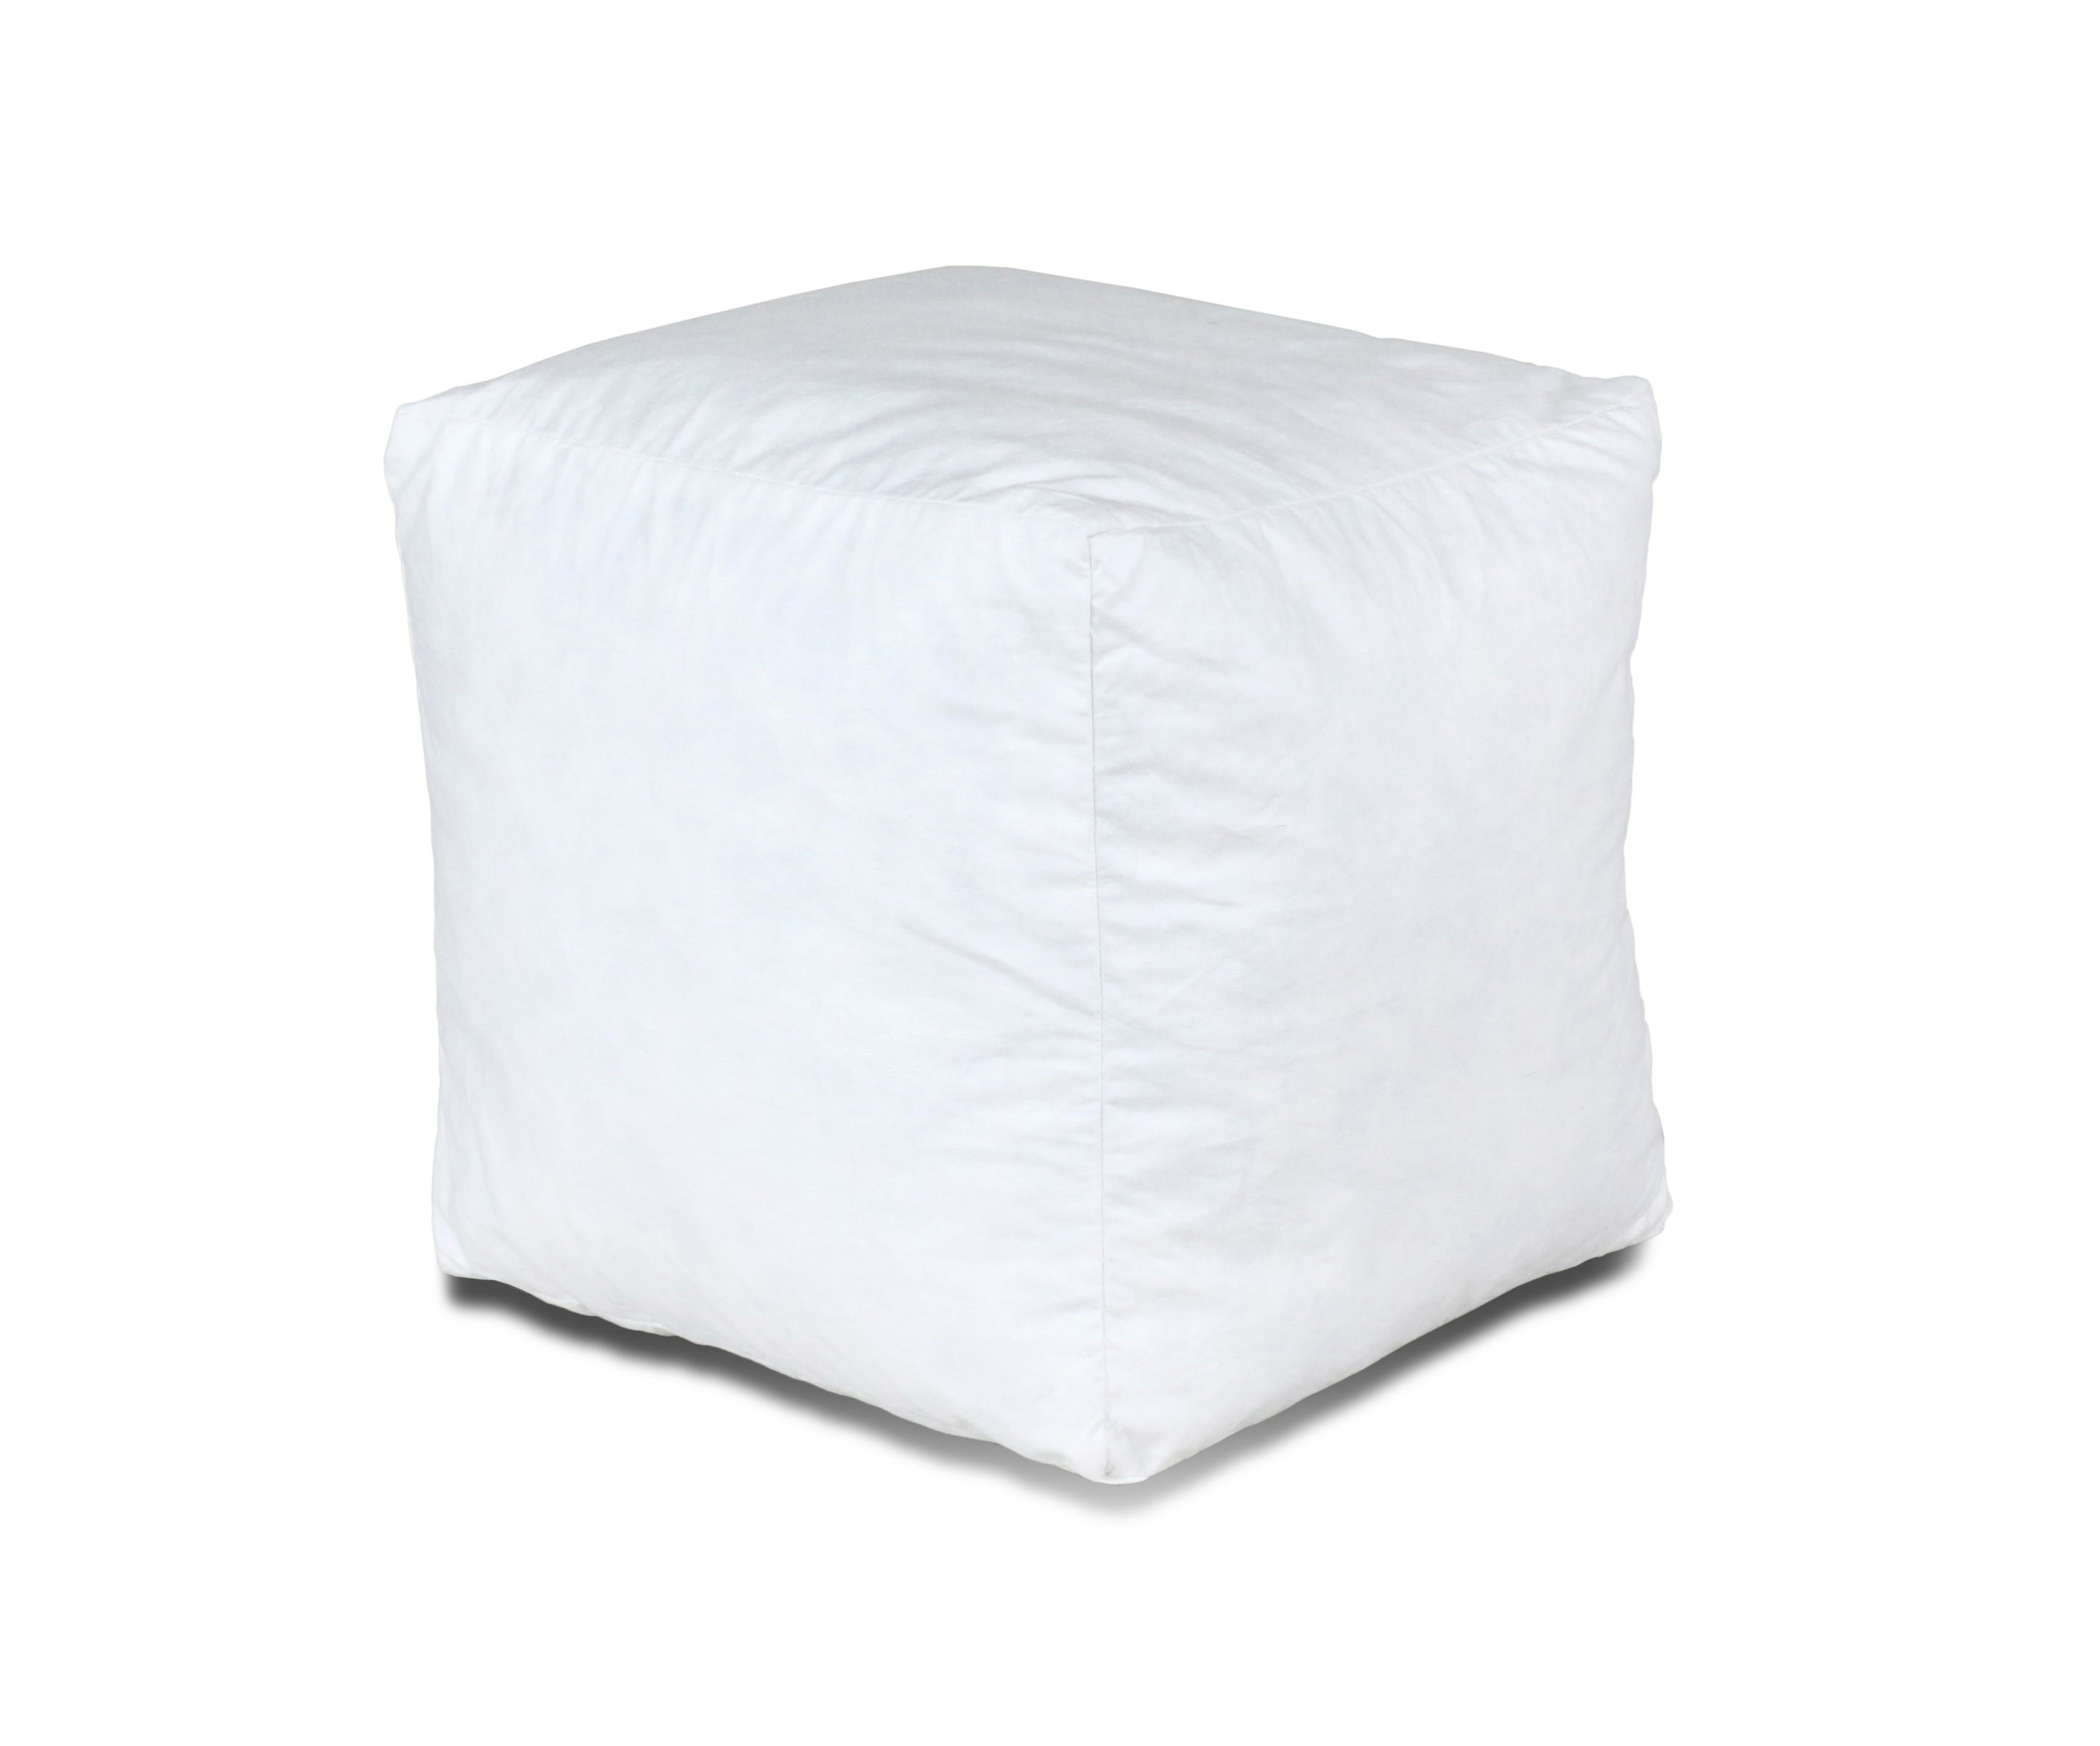 Cotton Covered Cube Pillow Insert - 8 x 8 x 8